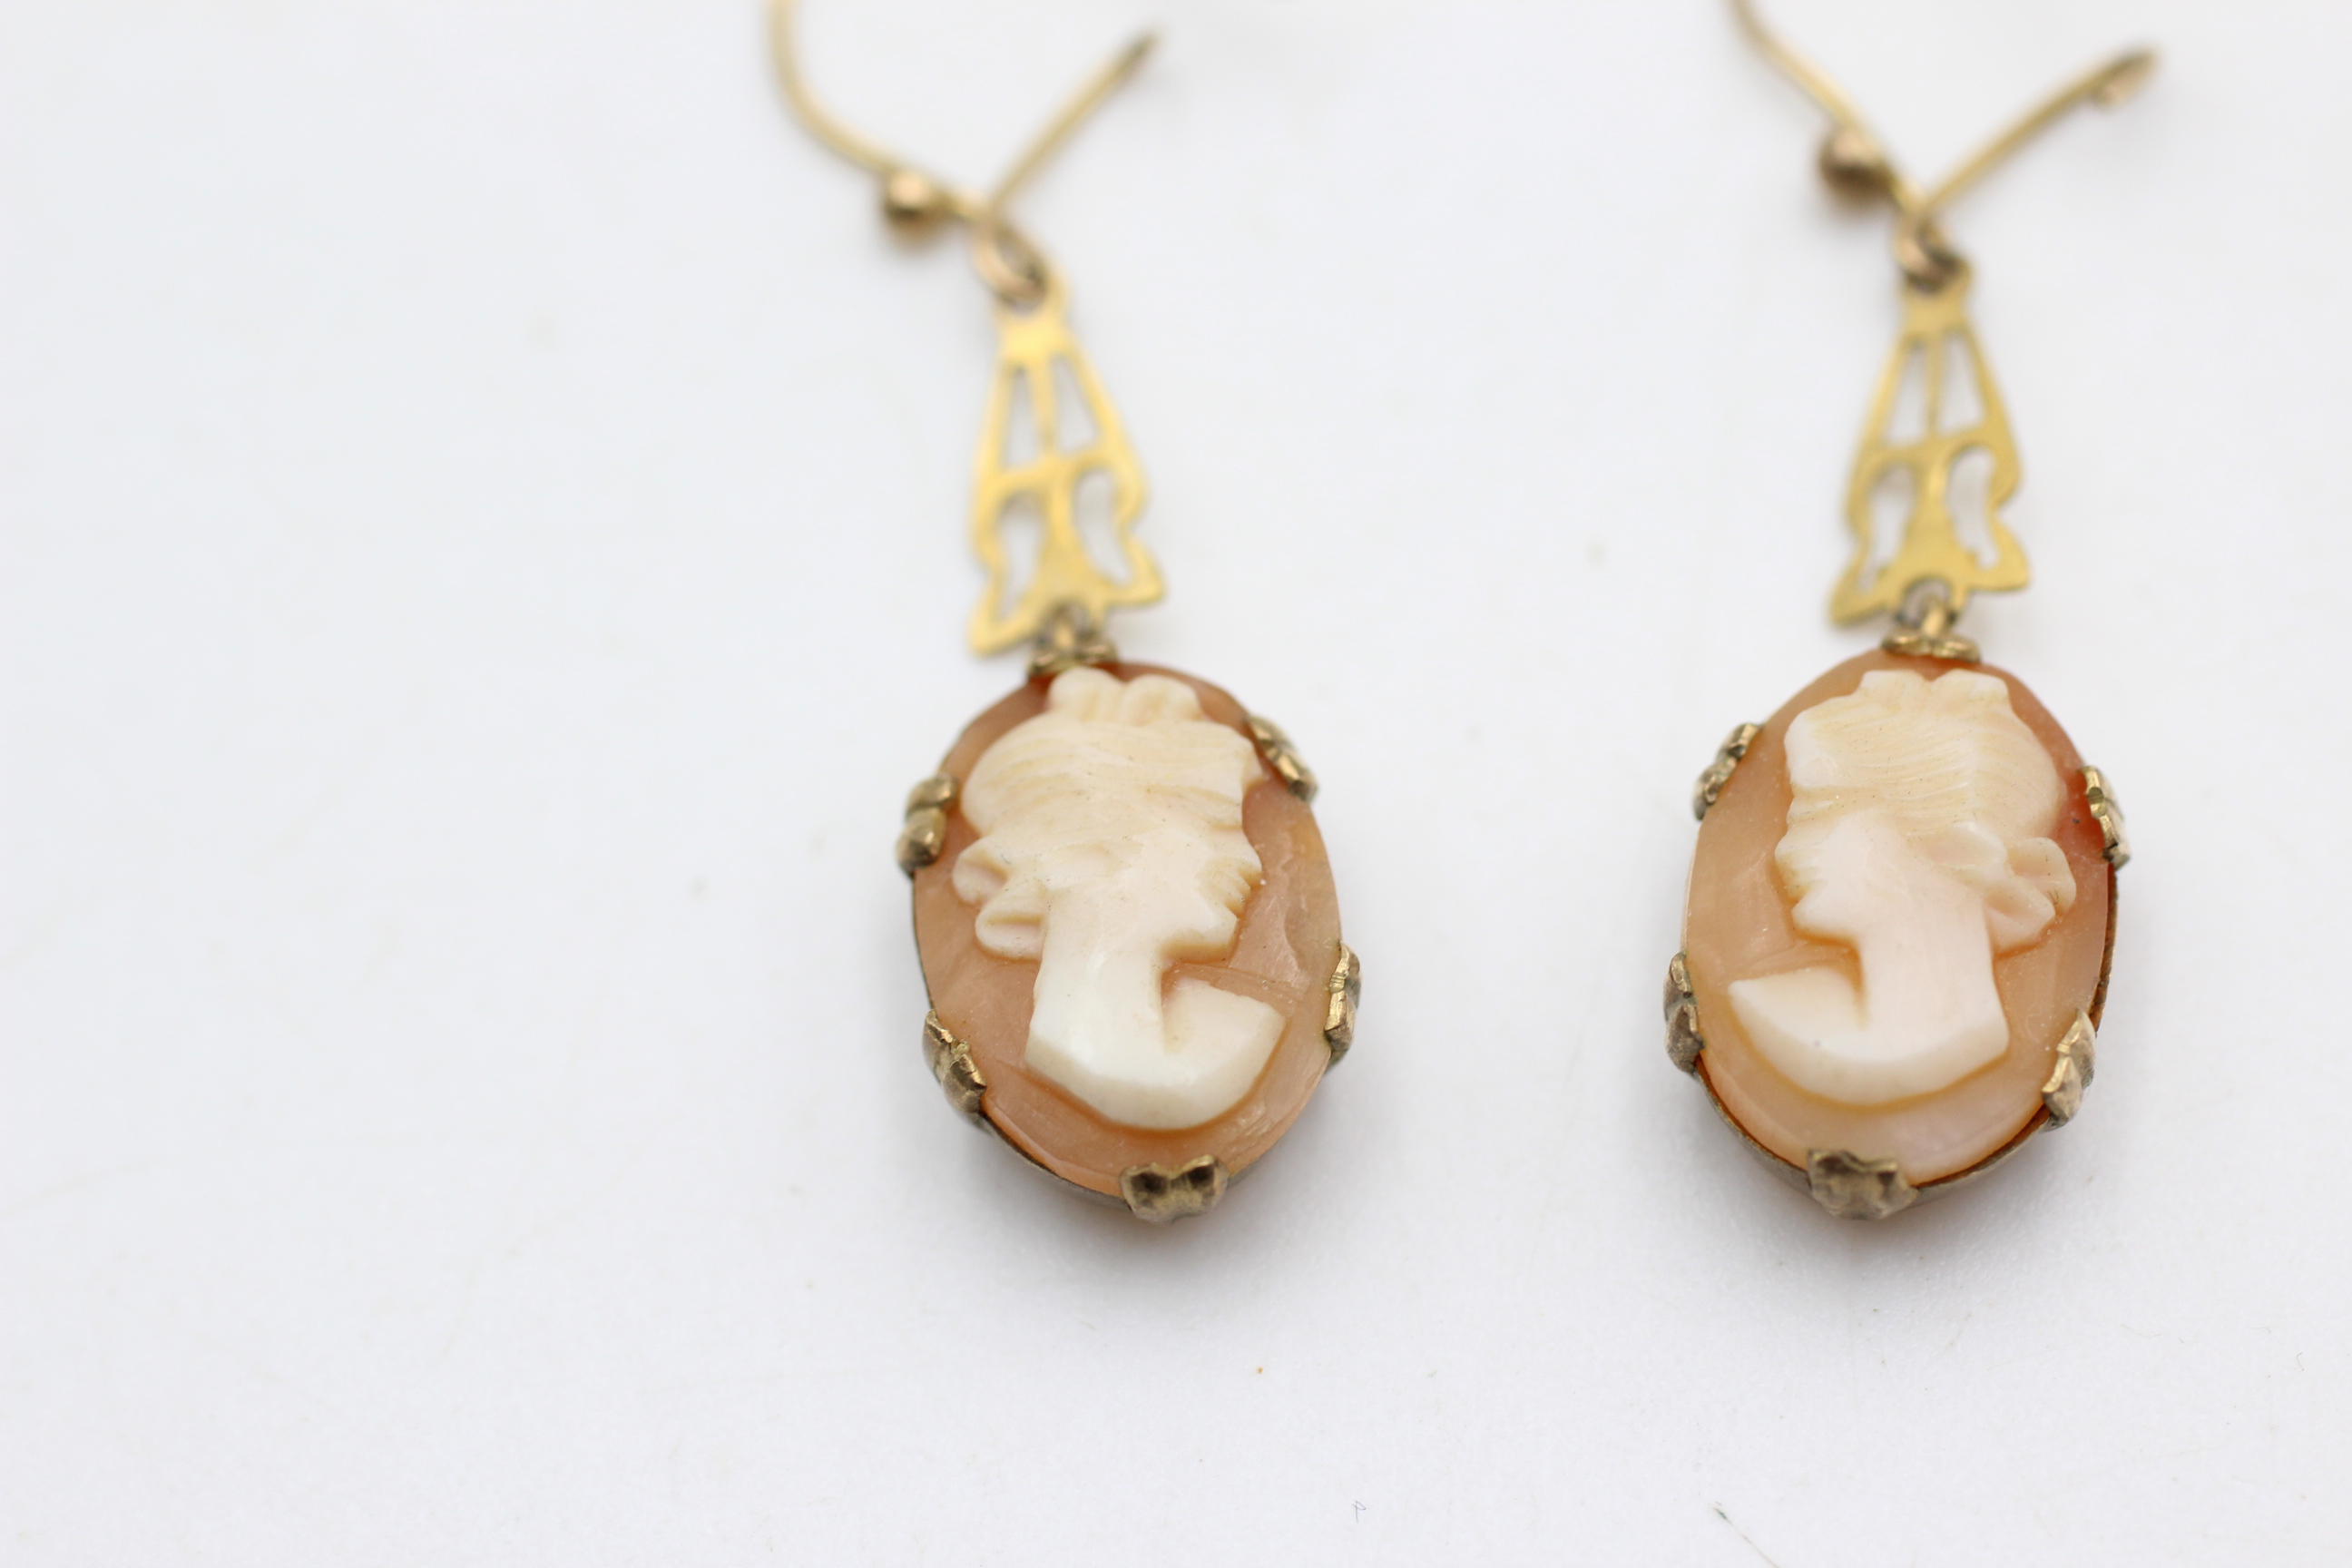 9ct gold vintage cameo drop earrings (2.8g) - Image 2 of 5